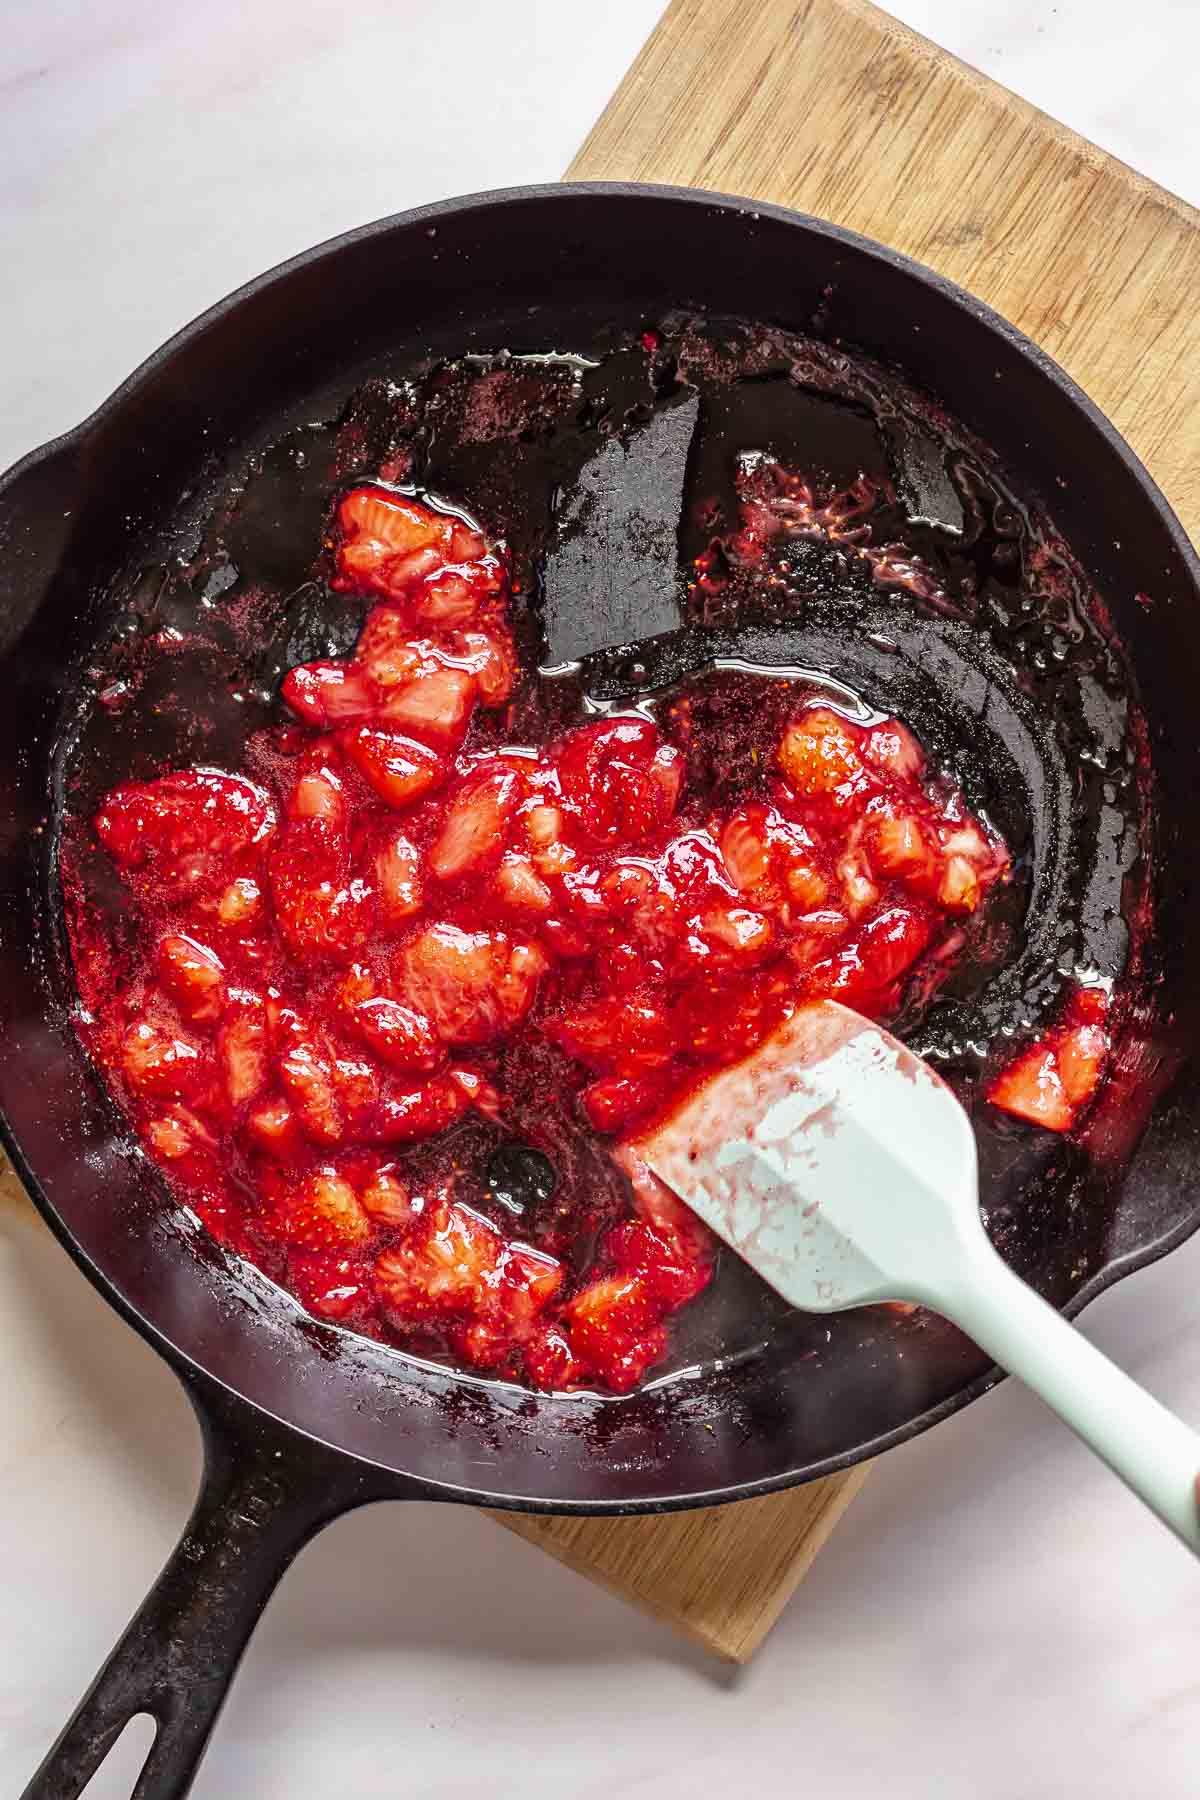 Strawberries cooking down in a pan.